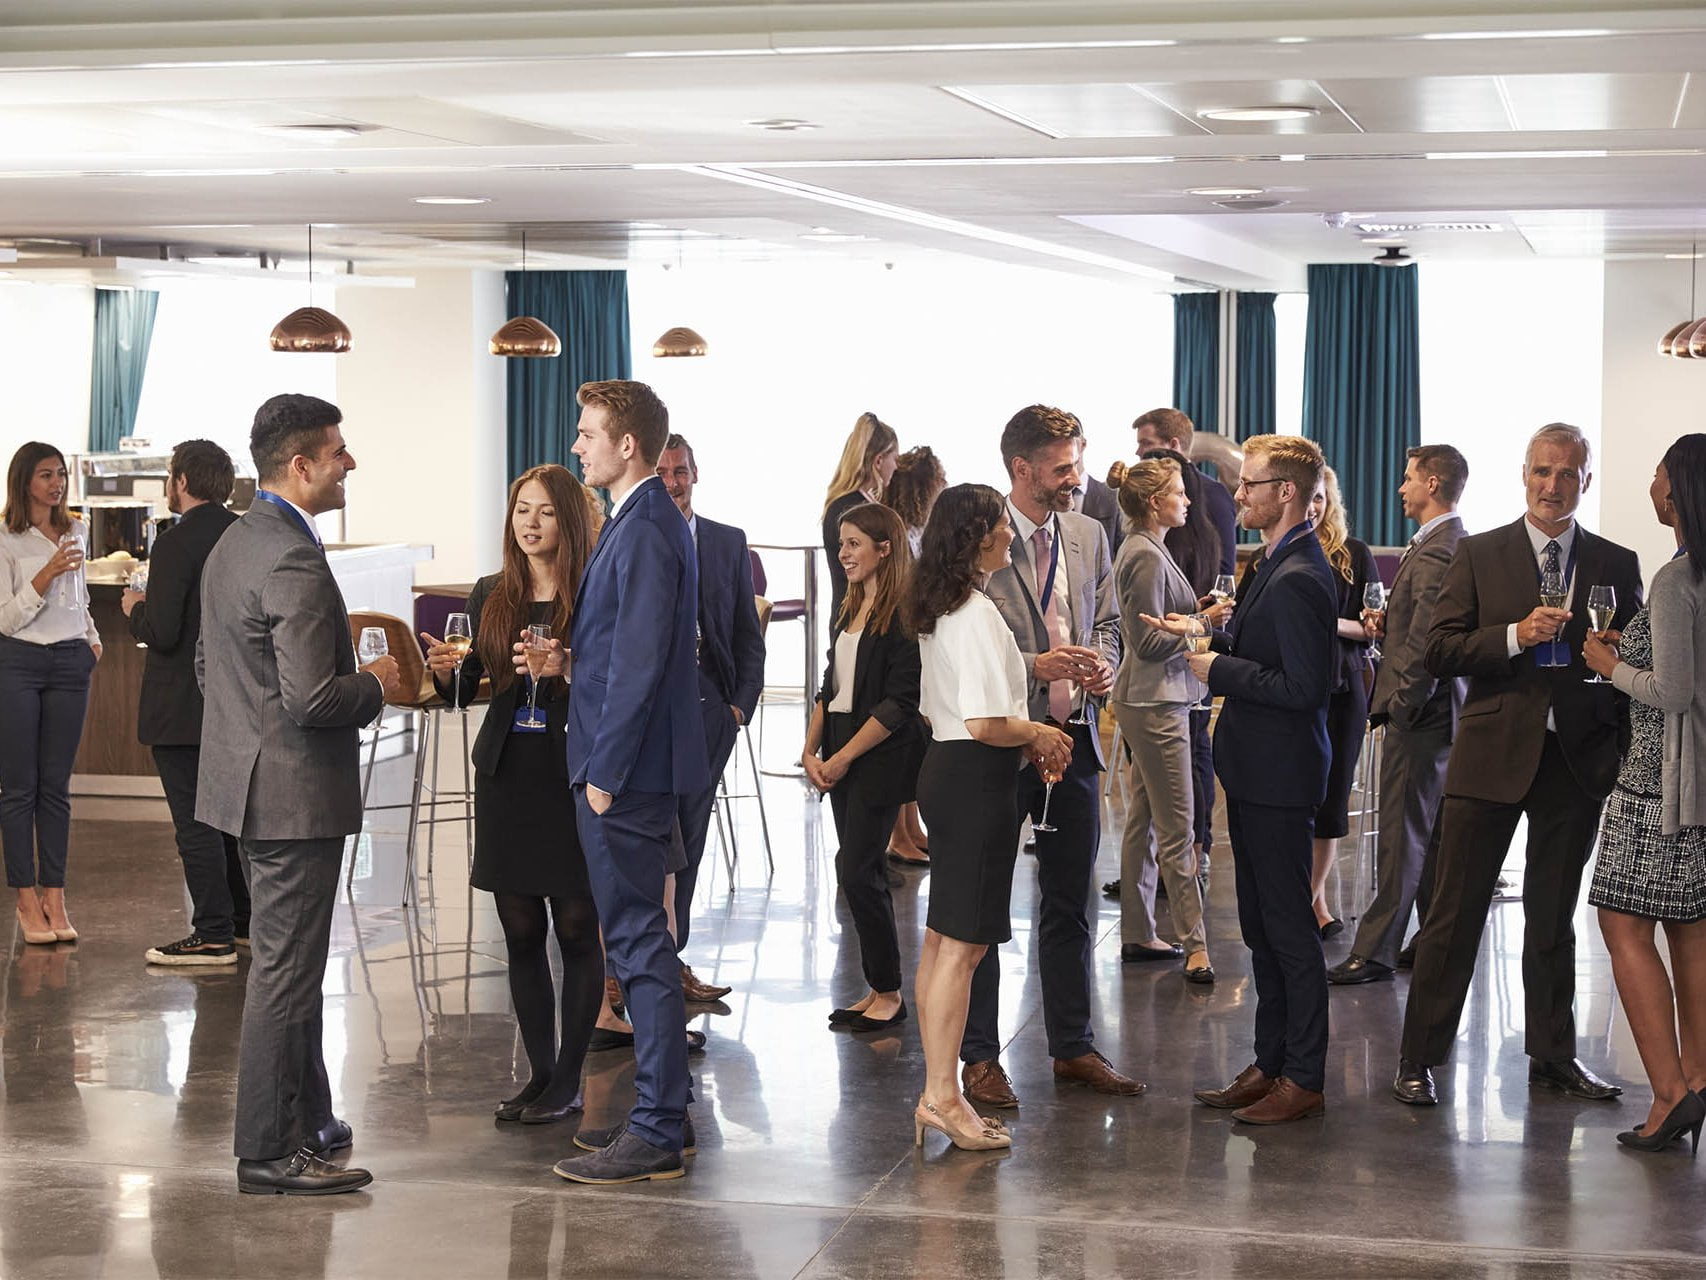 A photo of a cafeteria hosting a networking event filled with business men and women mingling together with drinks. This is an image relating to the blog article: Five tips for attending networking events